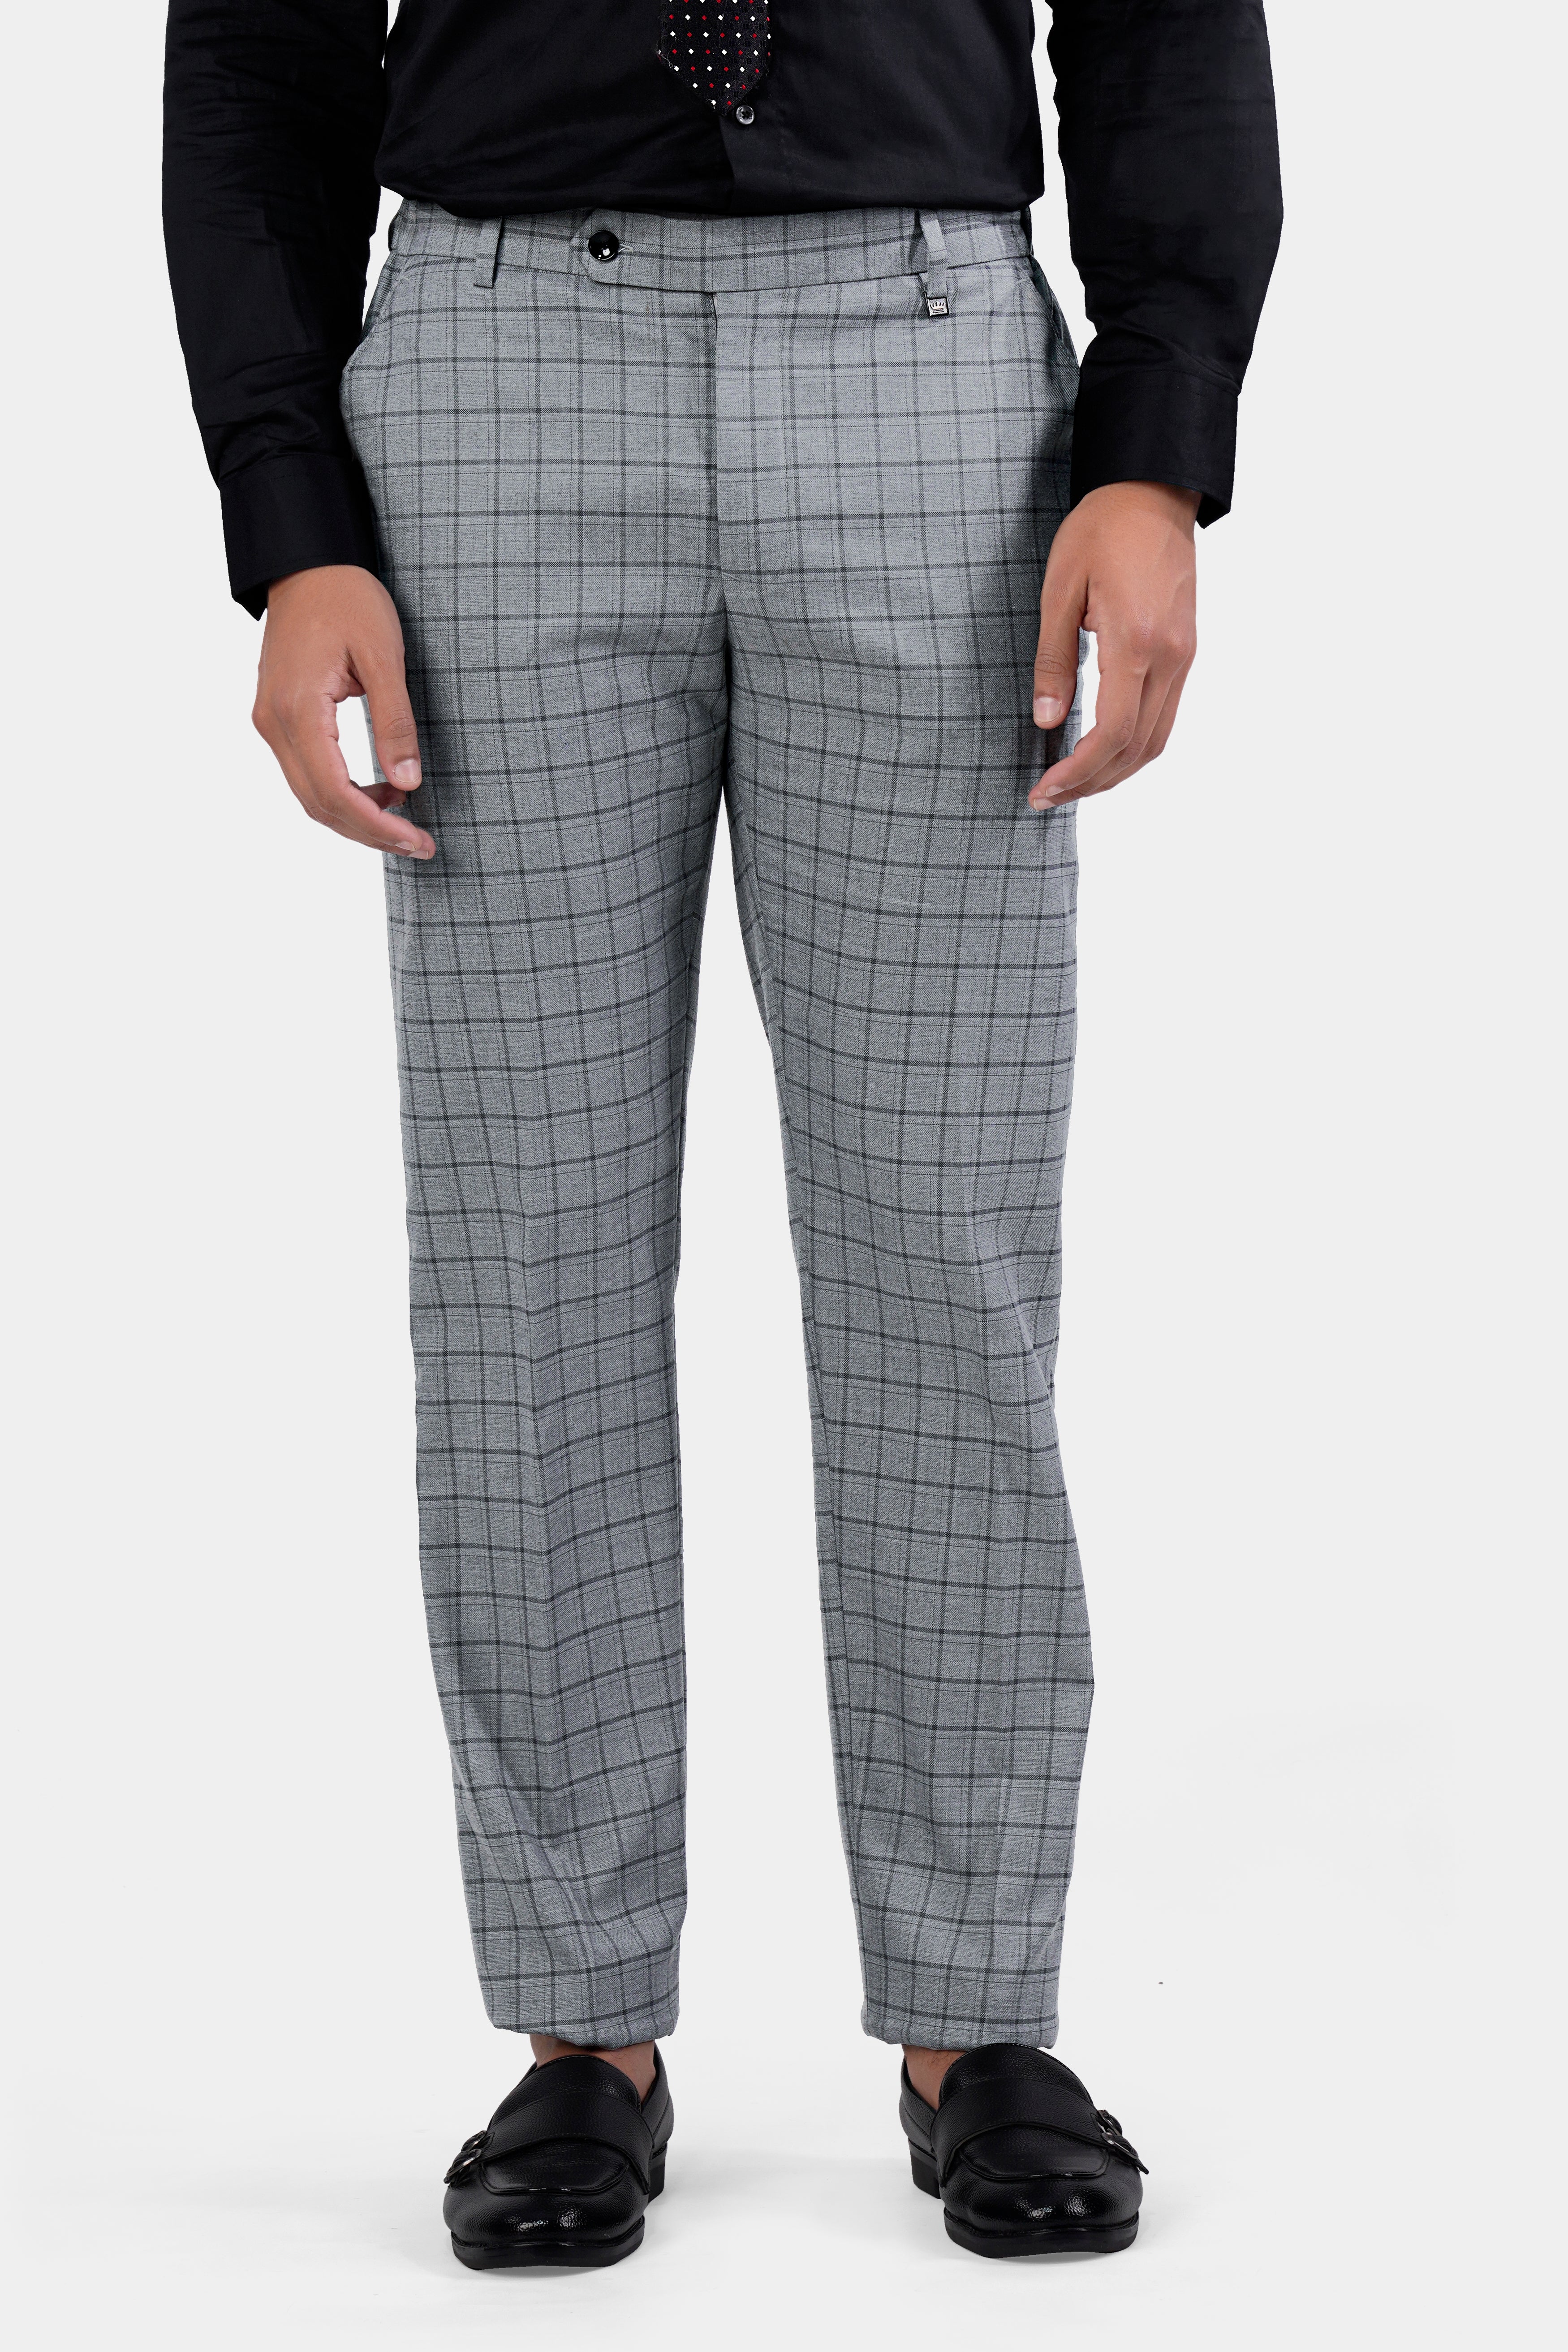 Boulder Gray Checkered Wool Rich Double Breasted Suit ST2930-DB-PP-36, ST2930-DB-PP-38, ST2930-DB-PP-40, ST2930-DB-PP-42, ST2930-DB-PP-44, ST2930-DB-PP-46, ST2930-DB-PP-48, ST2930-DB-PP-50, ST2930-DB-PP-52, ST2930-DB-PP-54, ST2930-DB-PP-56, ST2930-DB-PP-58, ST2930-DB-PP-60